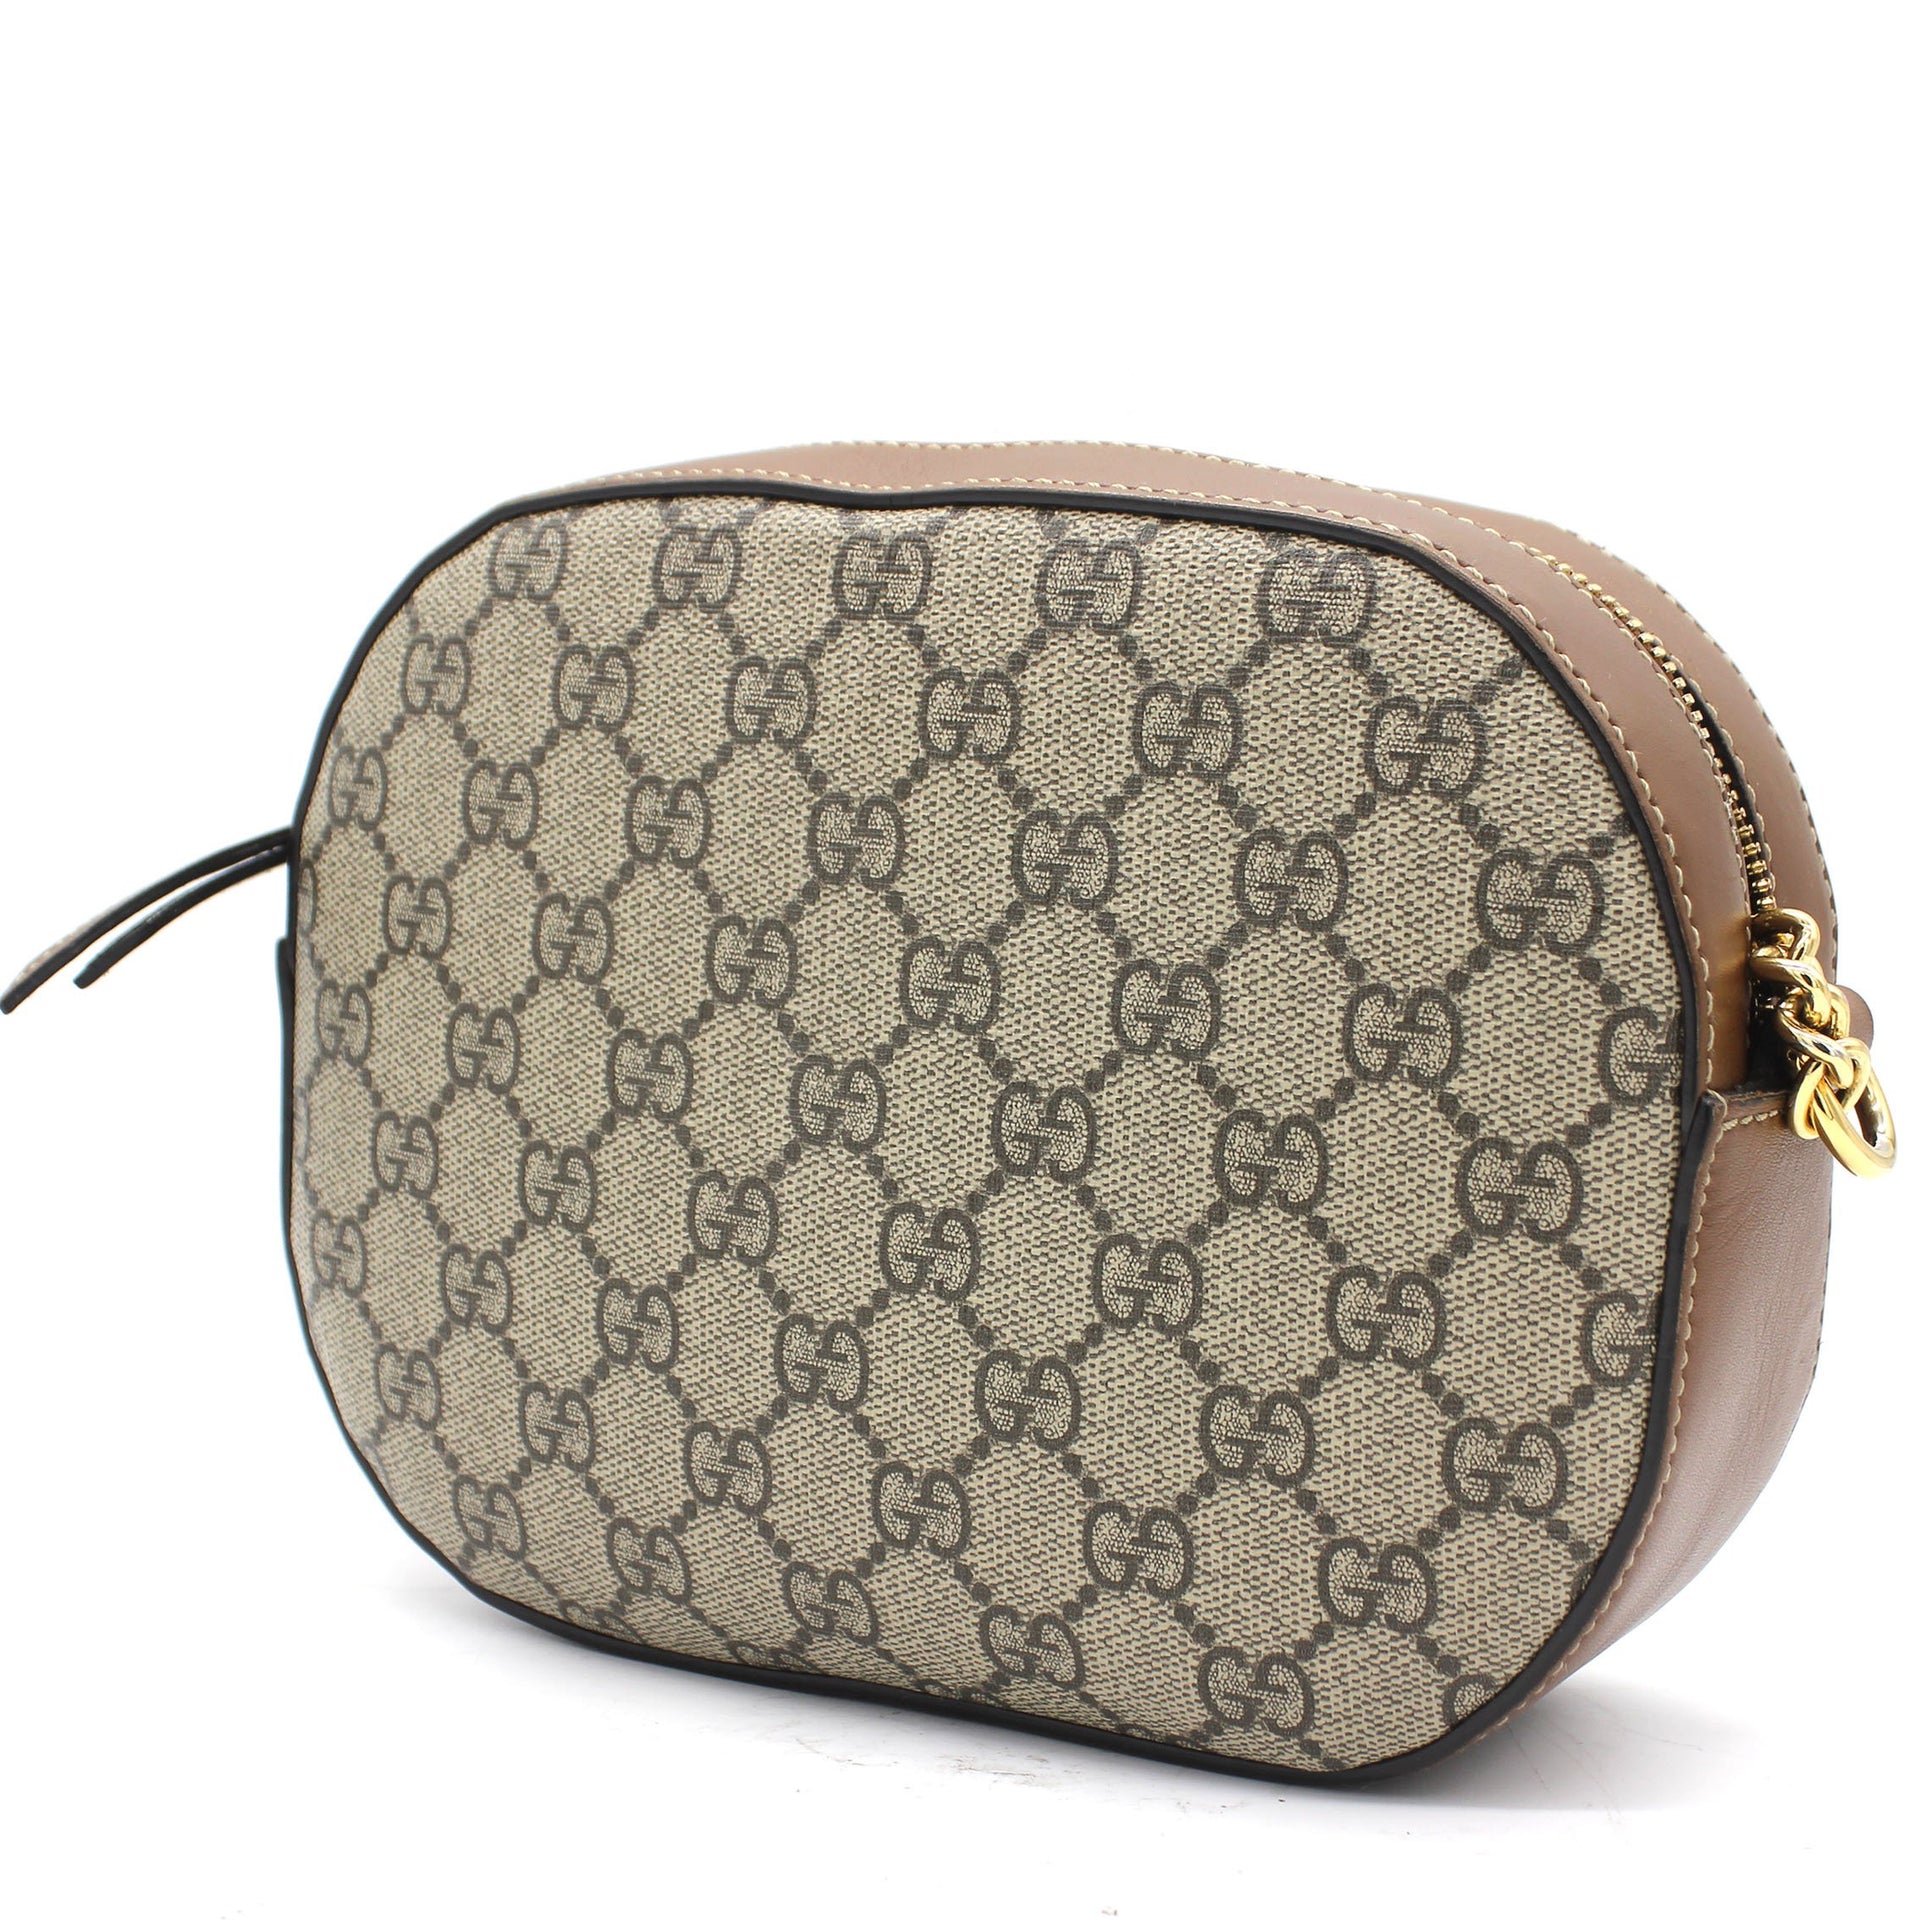 Gucci Marmont Small Quilted Camera Bag! | Gucci marmont small, Gucci  marmont, Gucci crossbody